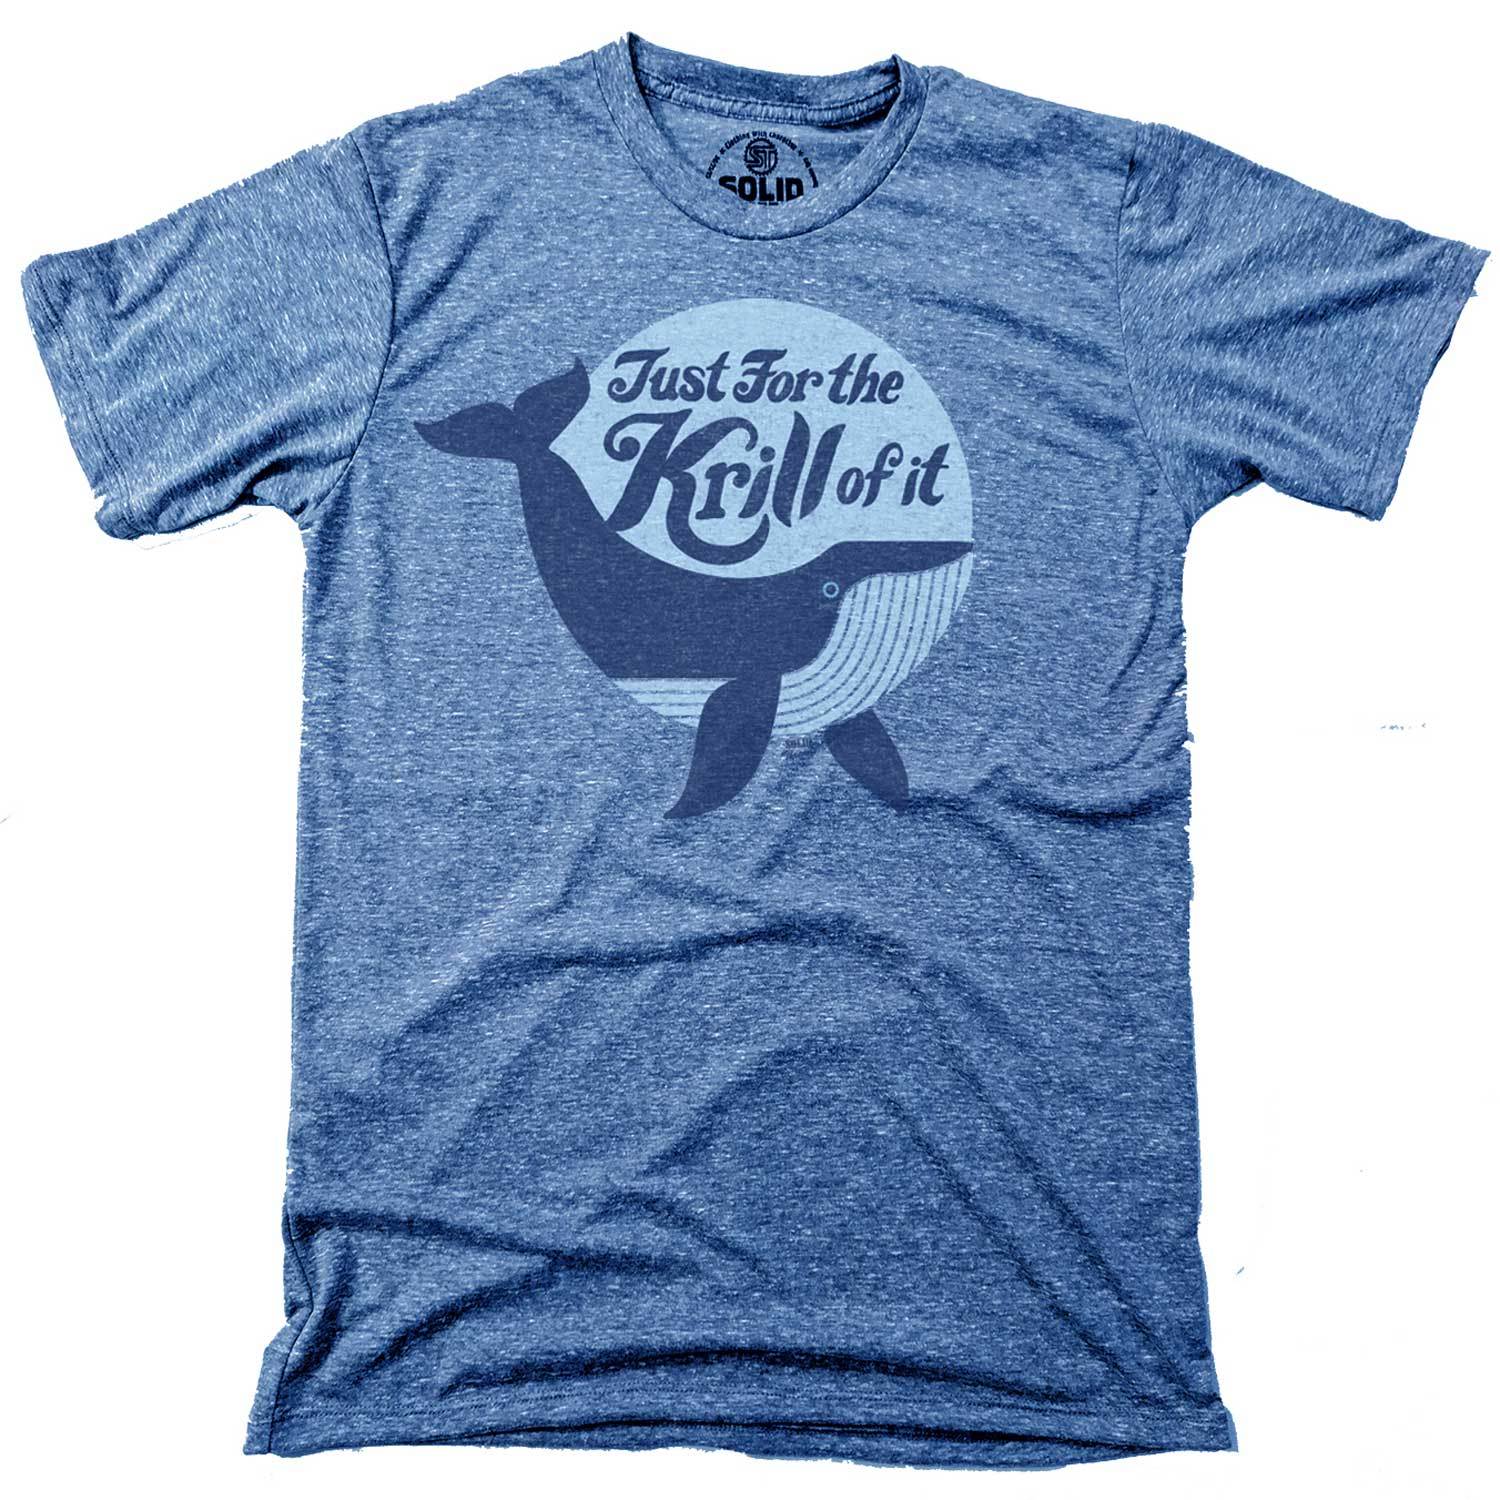 Men's Just For the Krill of It Vintage Graphic Tee | Funny Whale Ocean T-shirt | Solid Threads